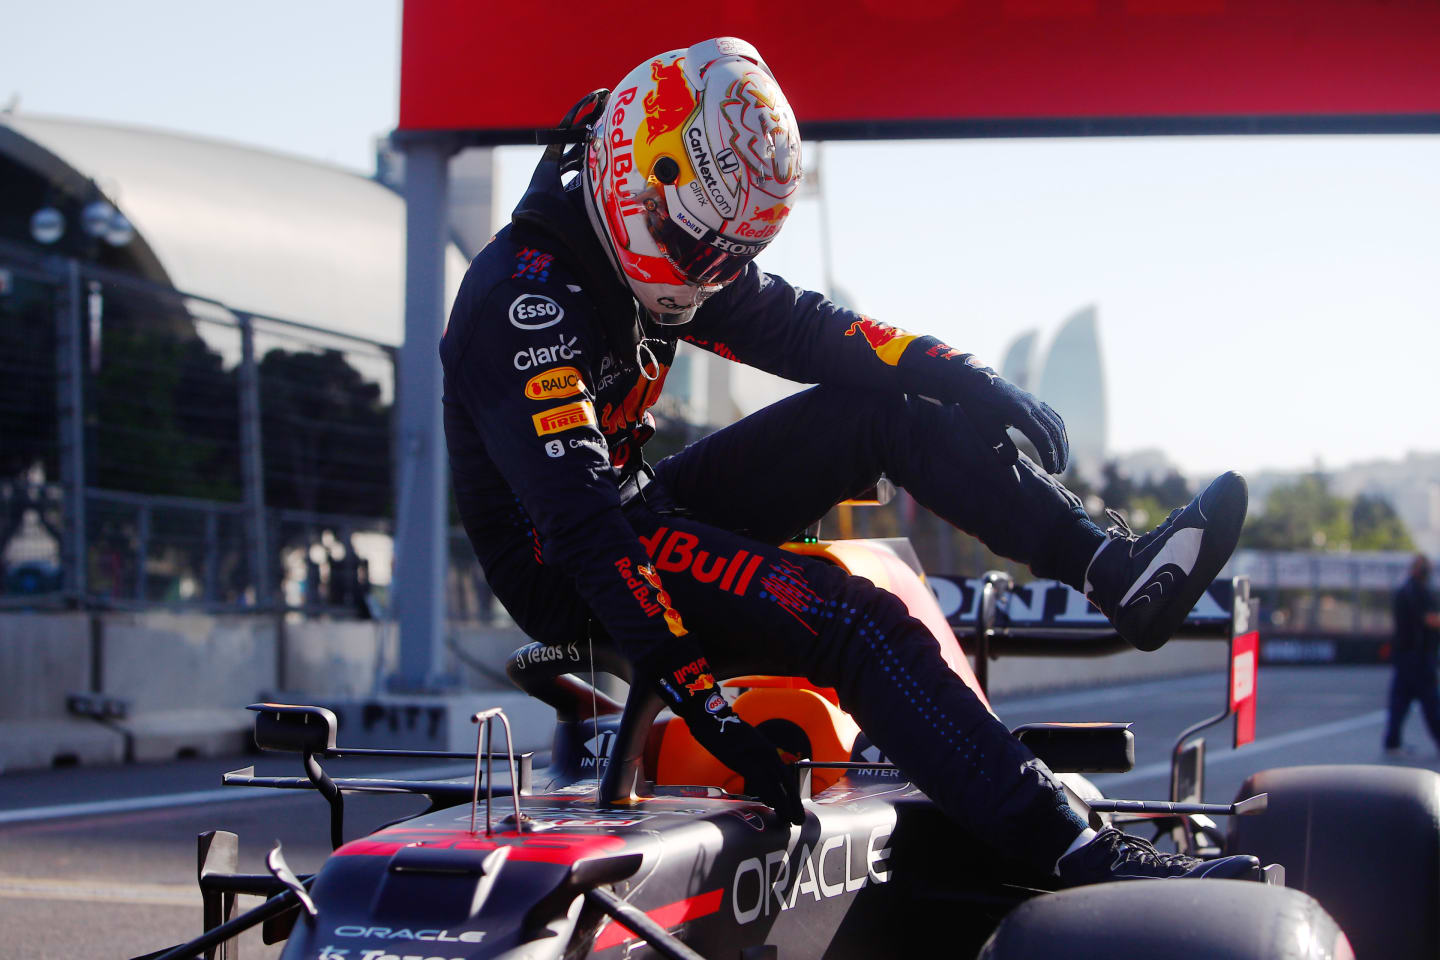 BAKU, AZERBAIJAN - JUNE 05: Third placed Max Verstappen of Netherlands and Red Bull Racing climbs out of his car in parc ferme during qualifying ahead of the F1 Grand Prix of Azerbaijan at Baku City Circuit on June 05, 2021 in Baku, Azerbaijan. (Photo by Maxim Shemetov - Pool/Getty Images)